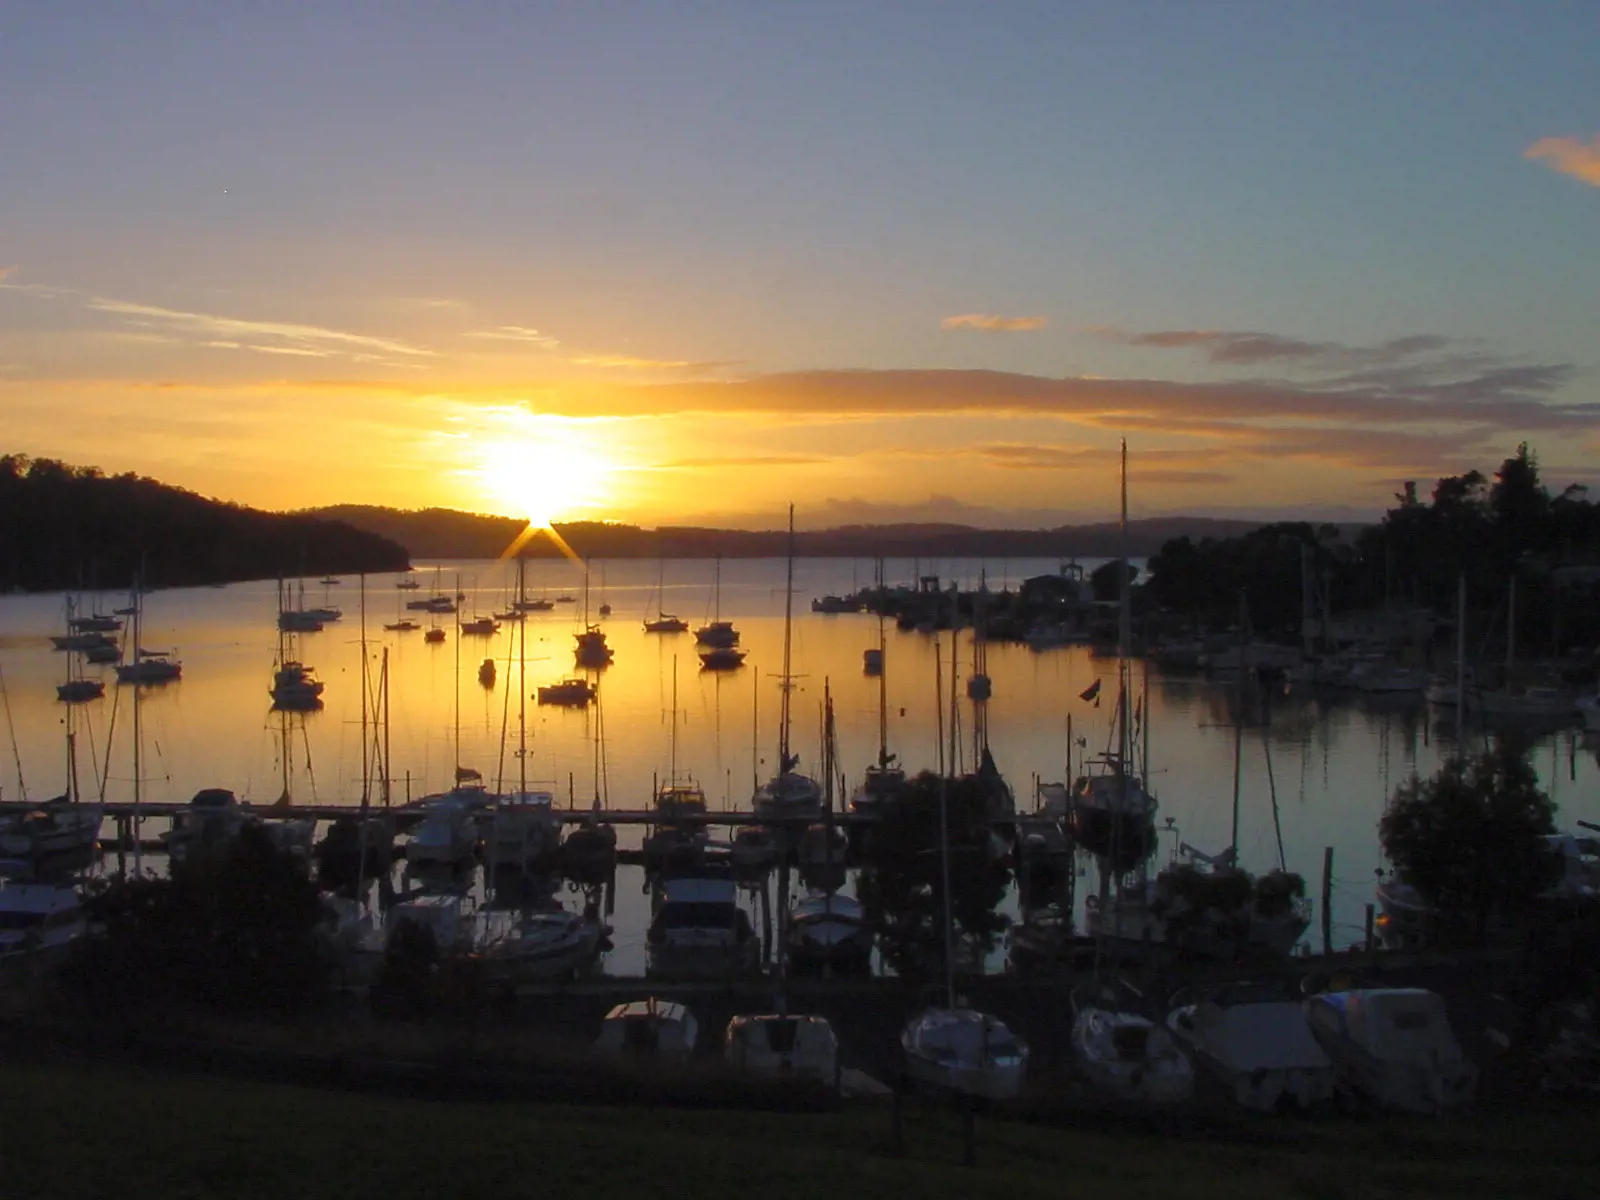 The sun sets over a calm ocean bay filled with moored boats in Kettering.